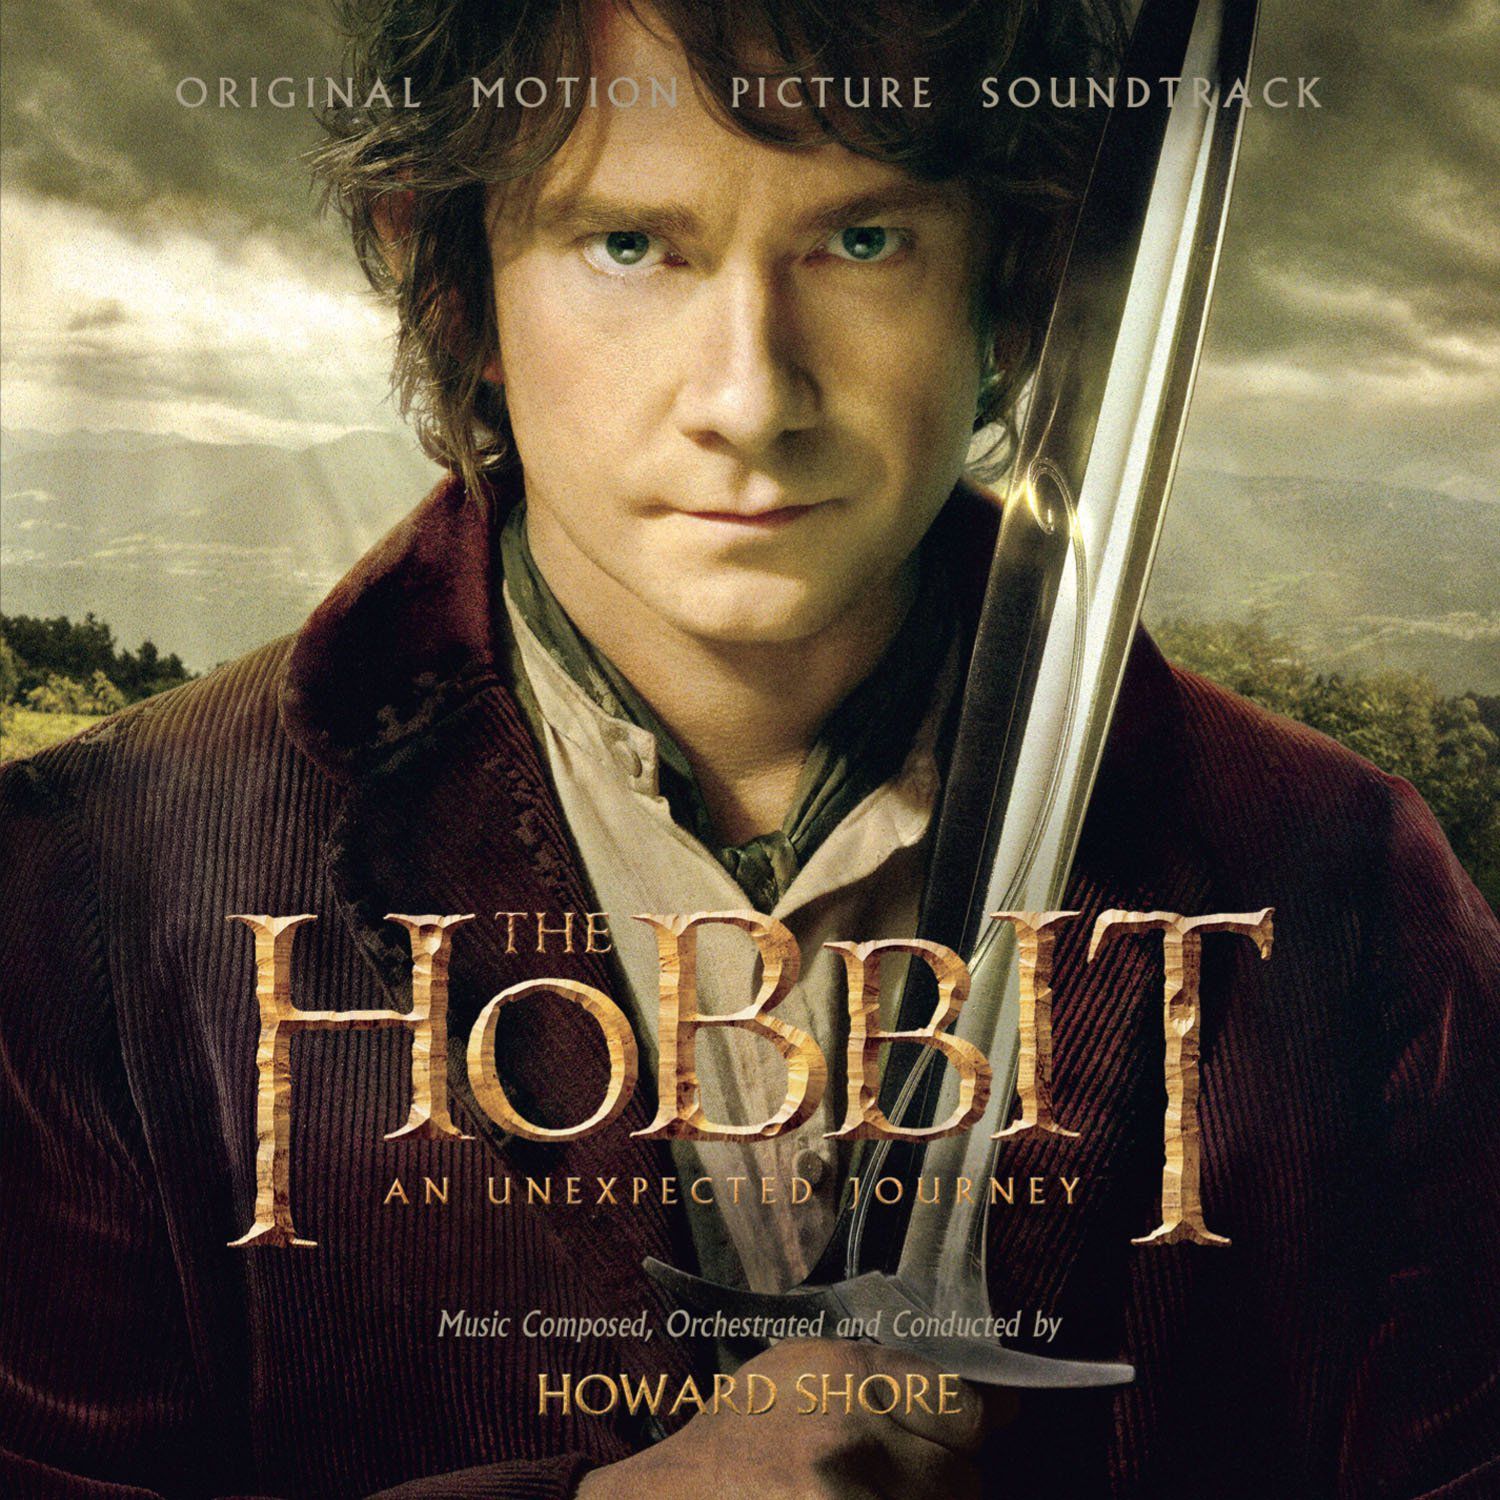 The Hobbit: An Unexpected Journey free downloads